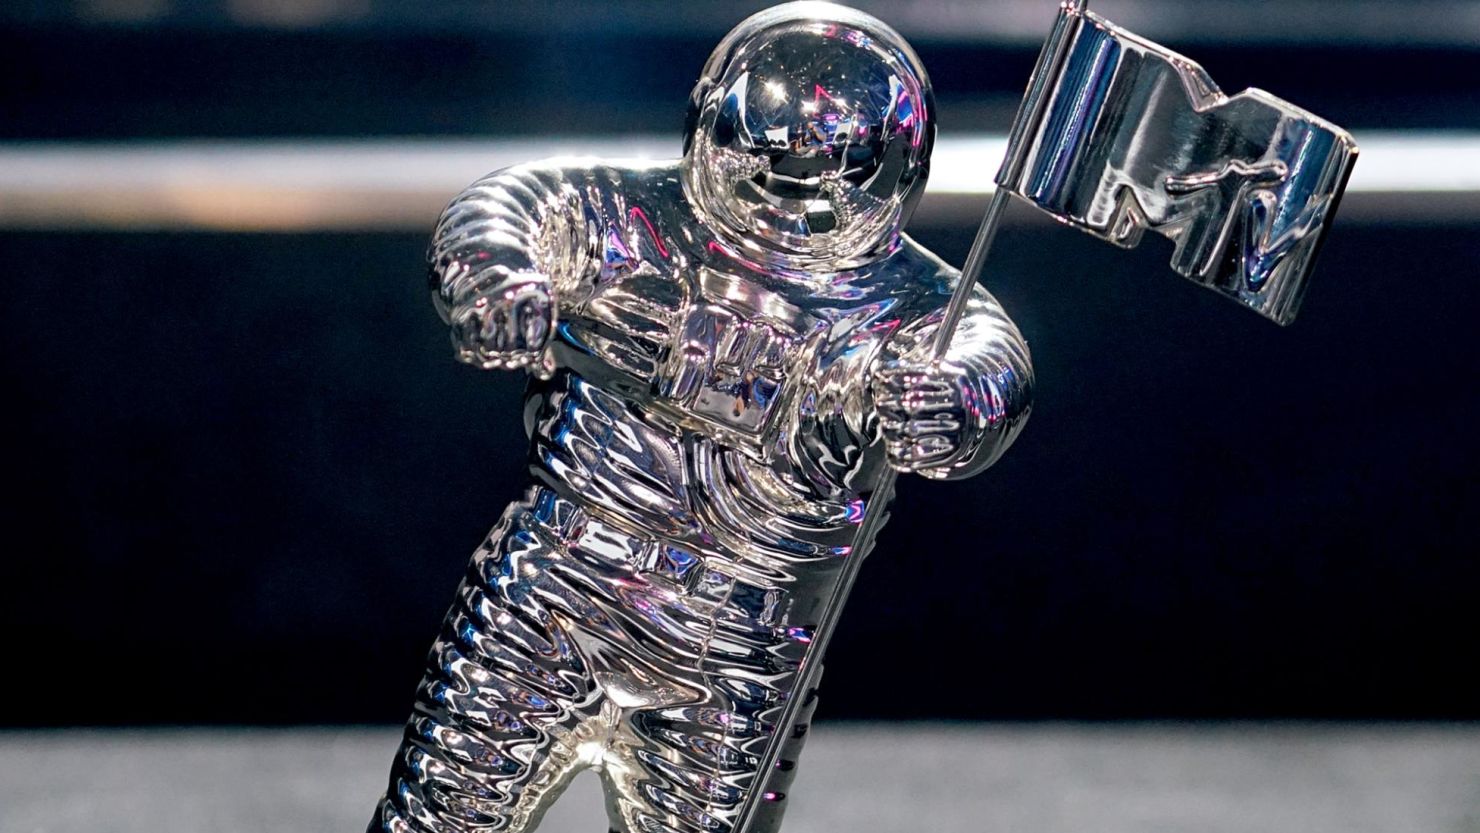 The MTV Moon Man statue is displayed at the 2019 MTV Video Music Awards at Prudential Center in August in Newark, New Jersey. 